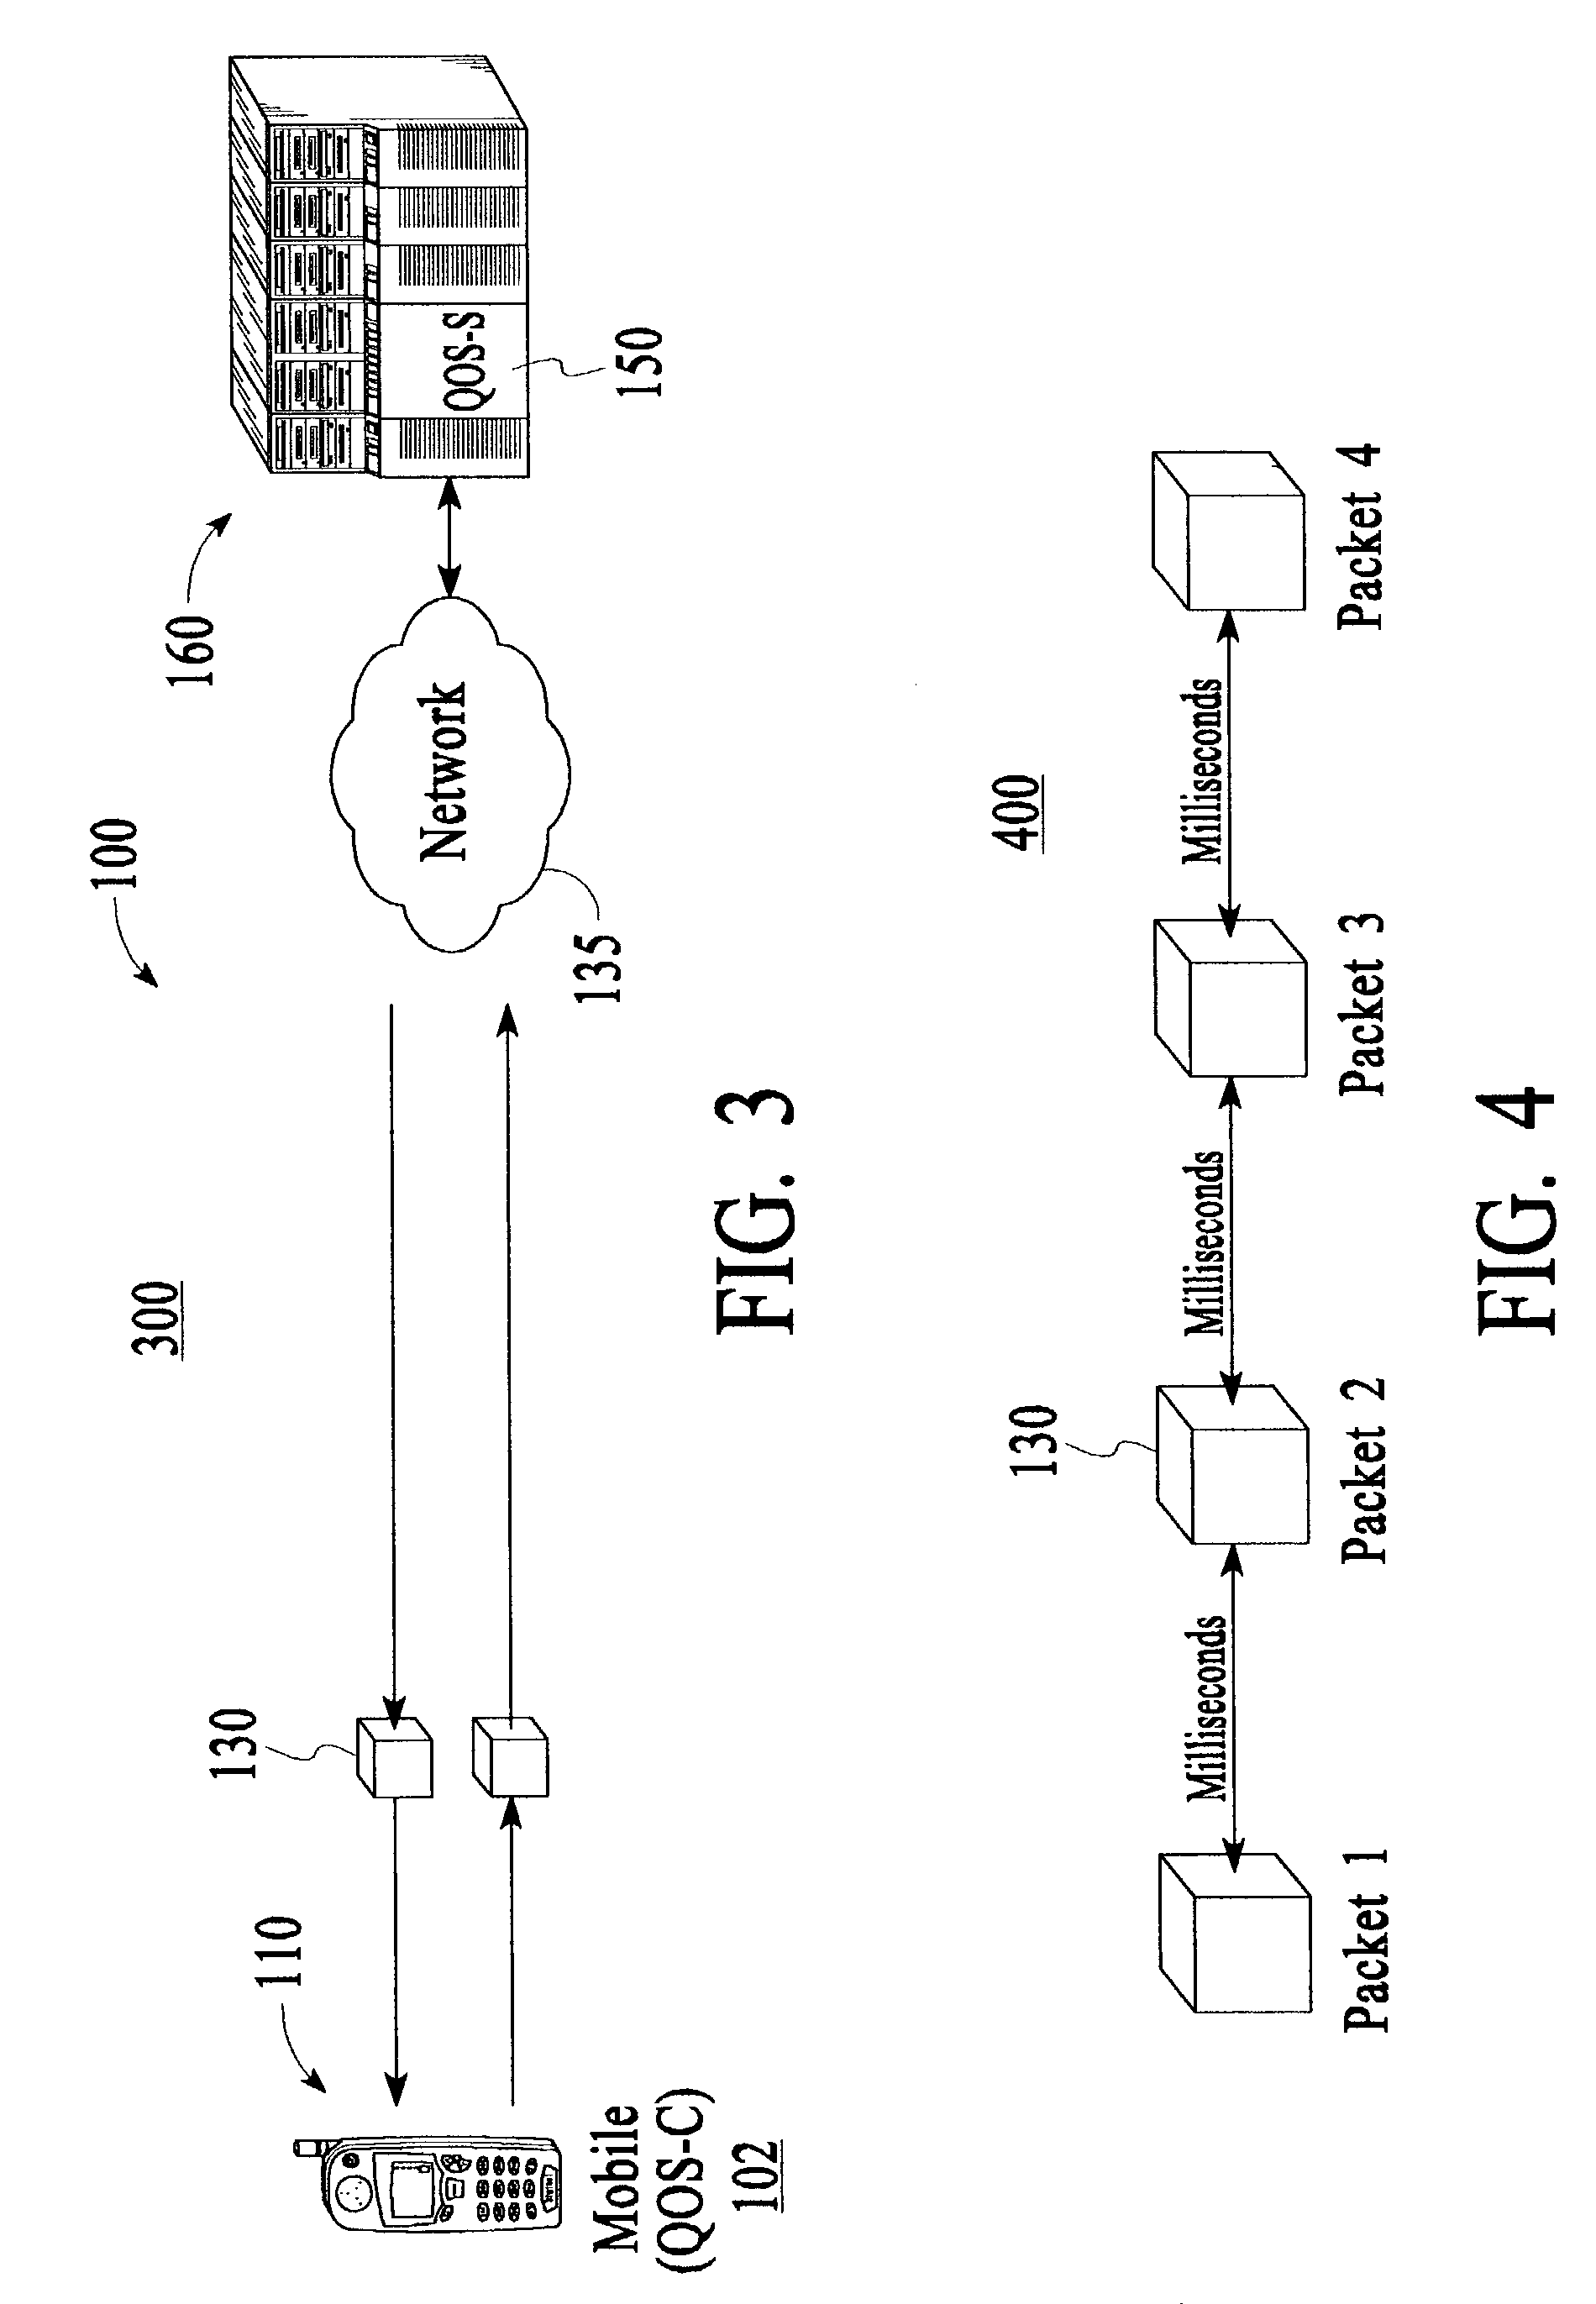 Method and system for quality of service (QoS) monitoring for wireless devices